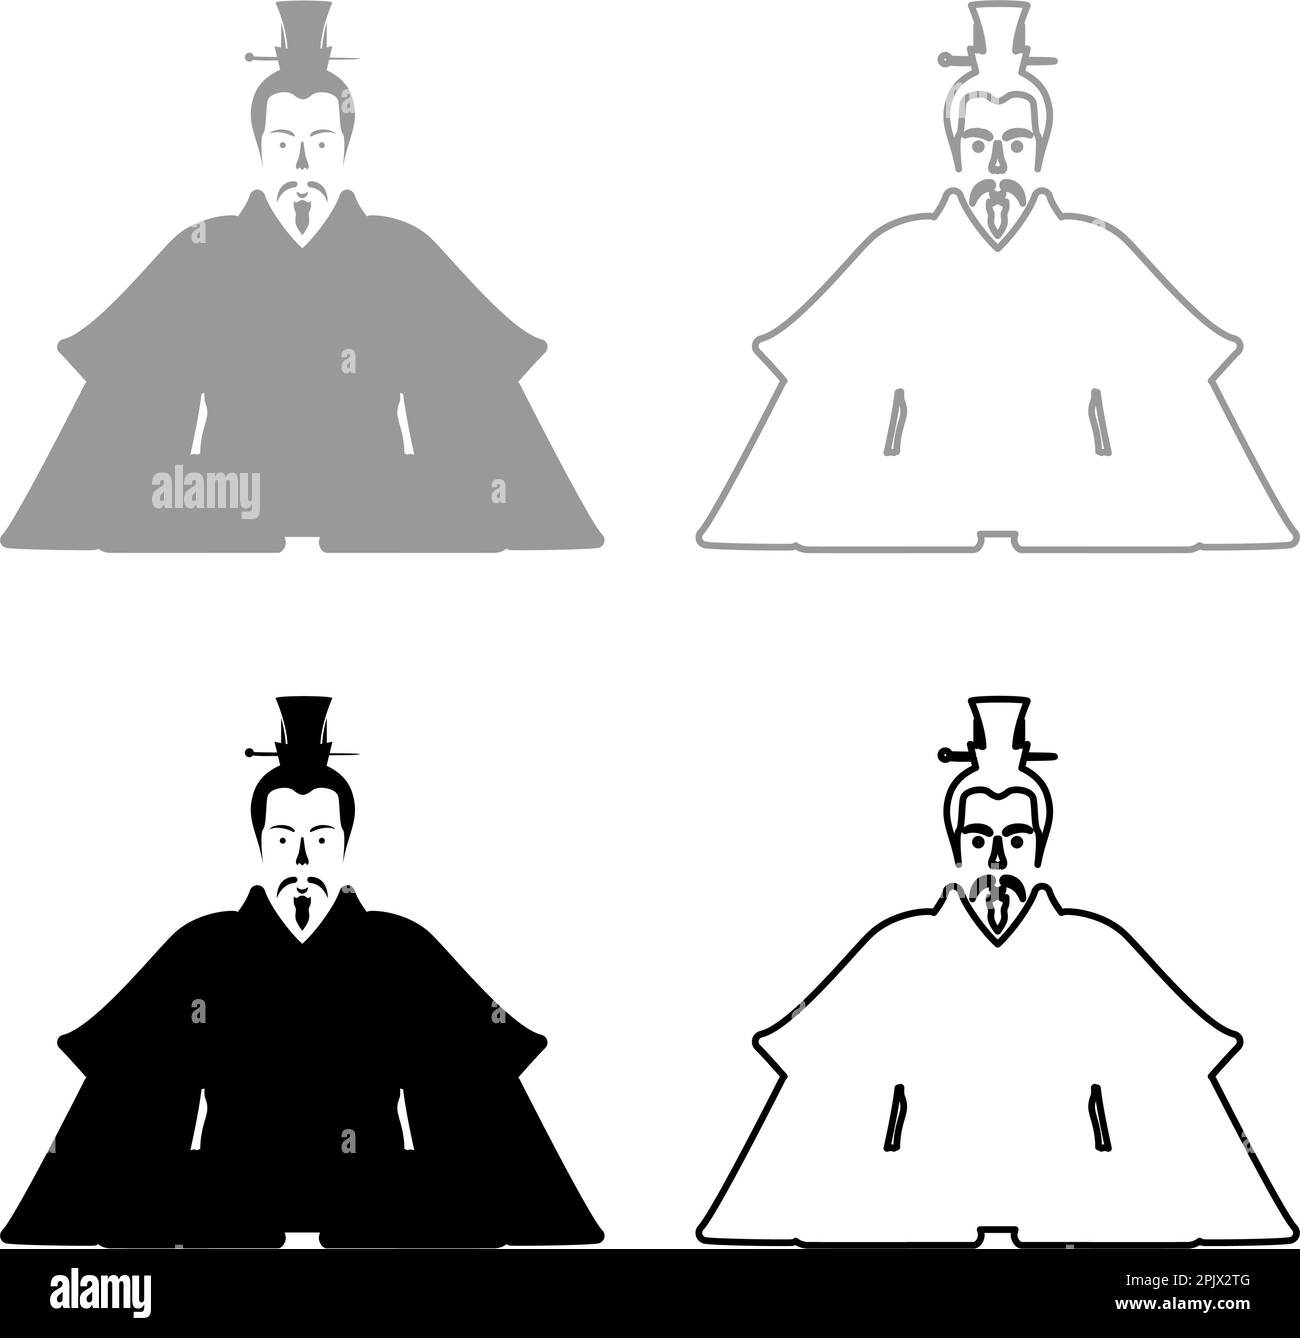 Emperor Japan China silhouette Chinese nobility Japanese ancient character avatar imperial ruler set icon grey black color vector illustration image Stock Vector